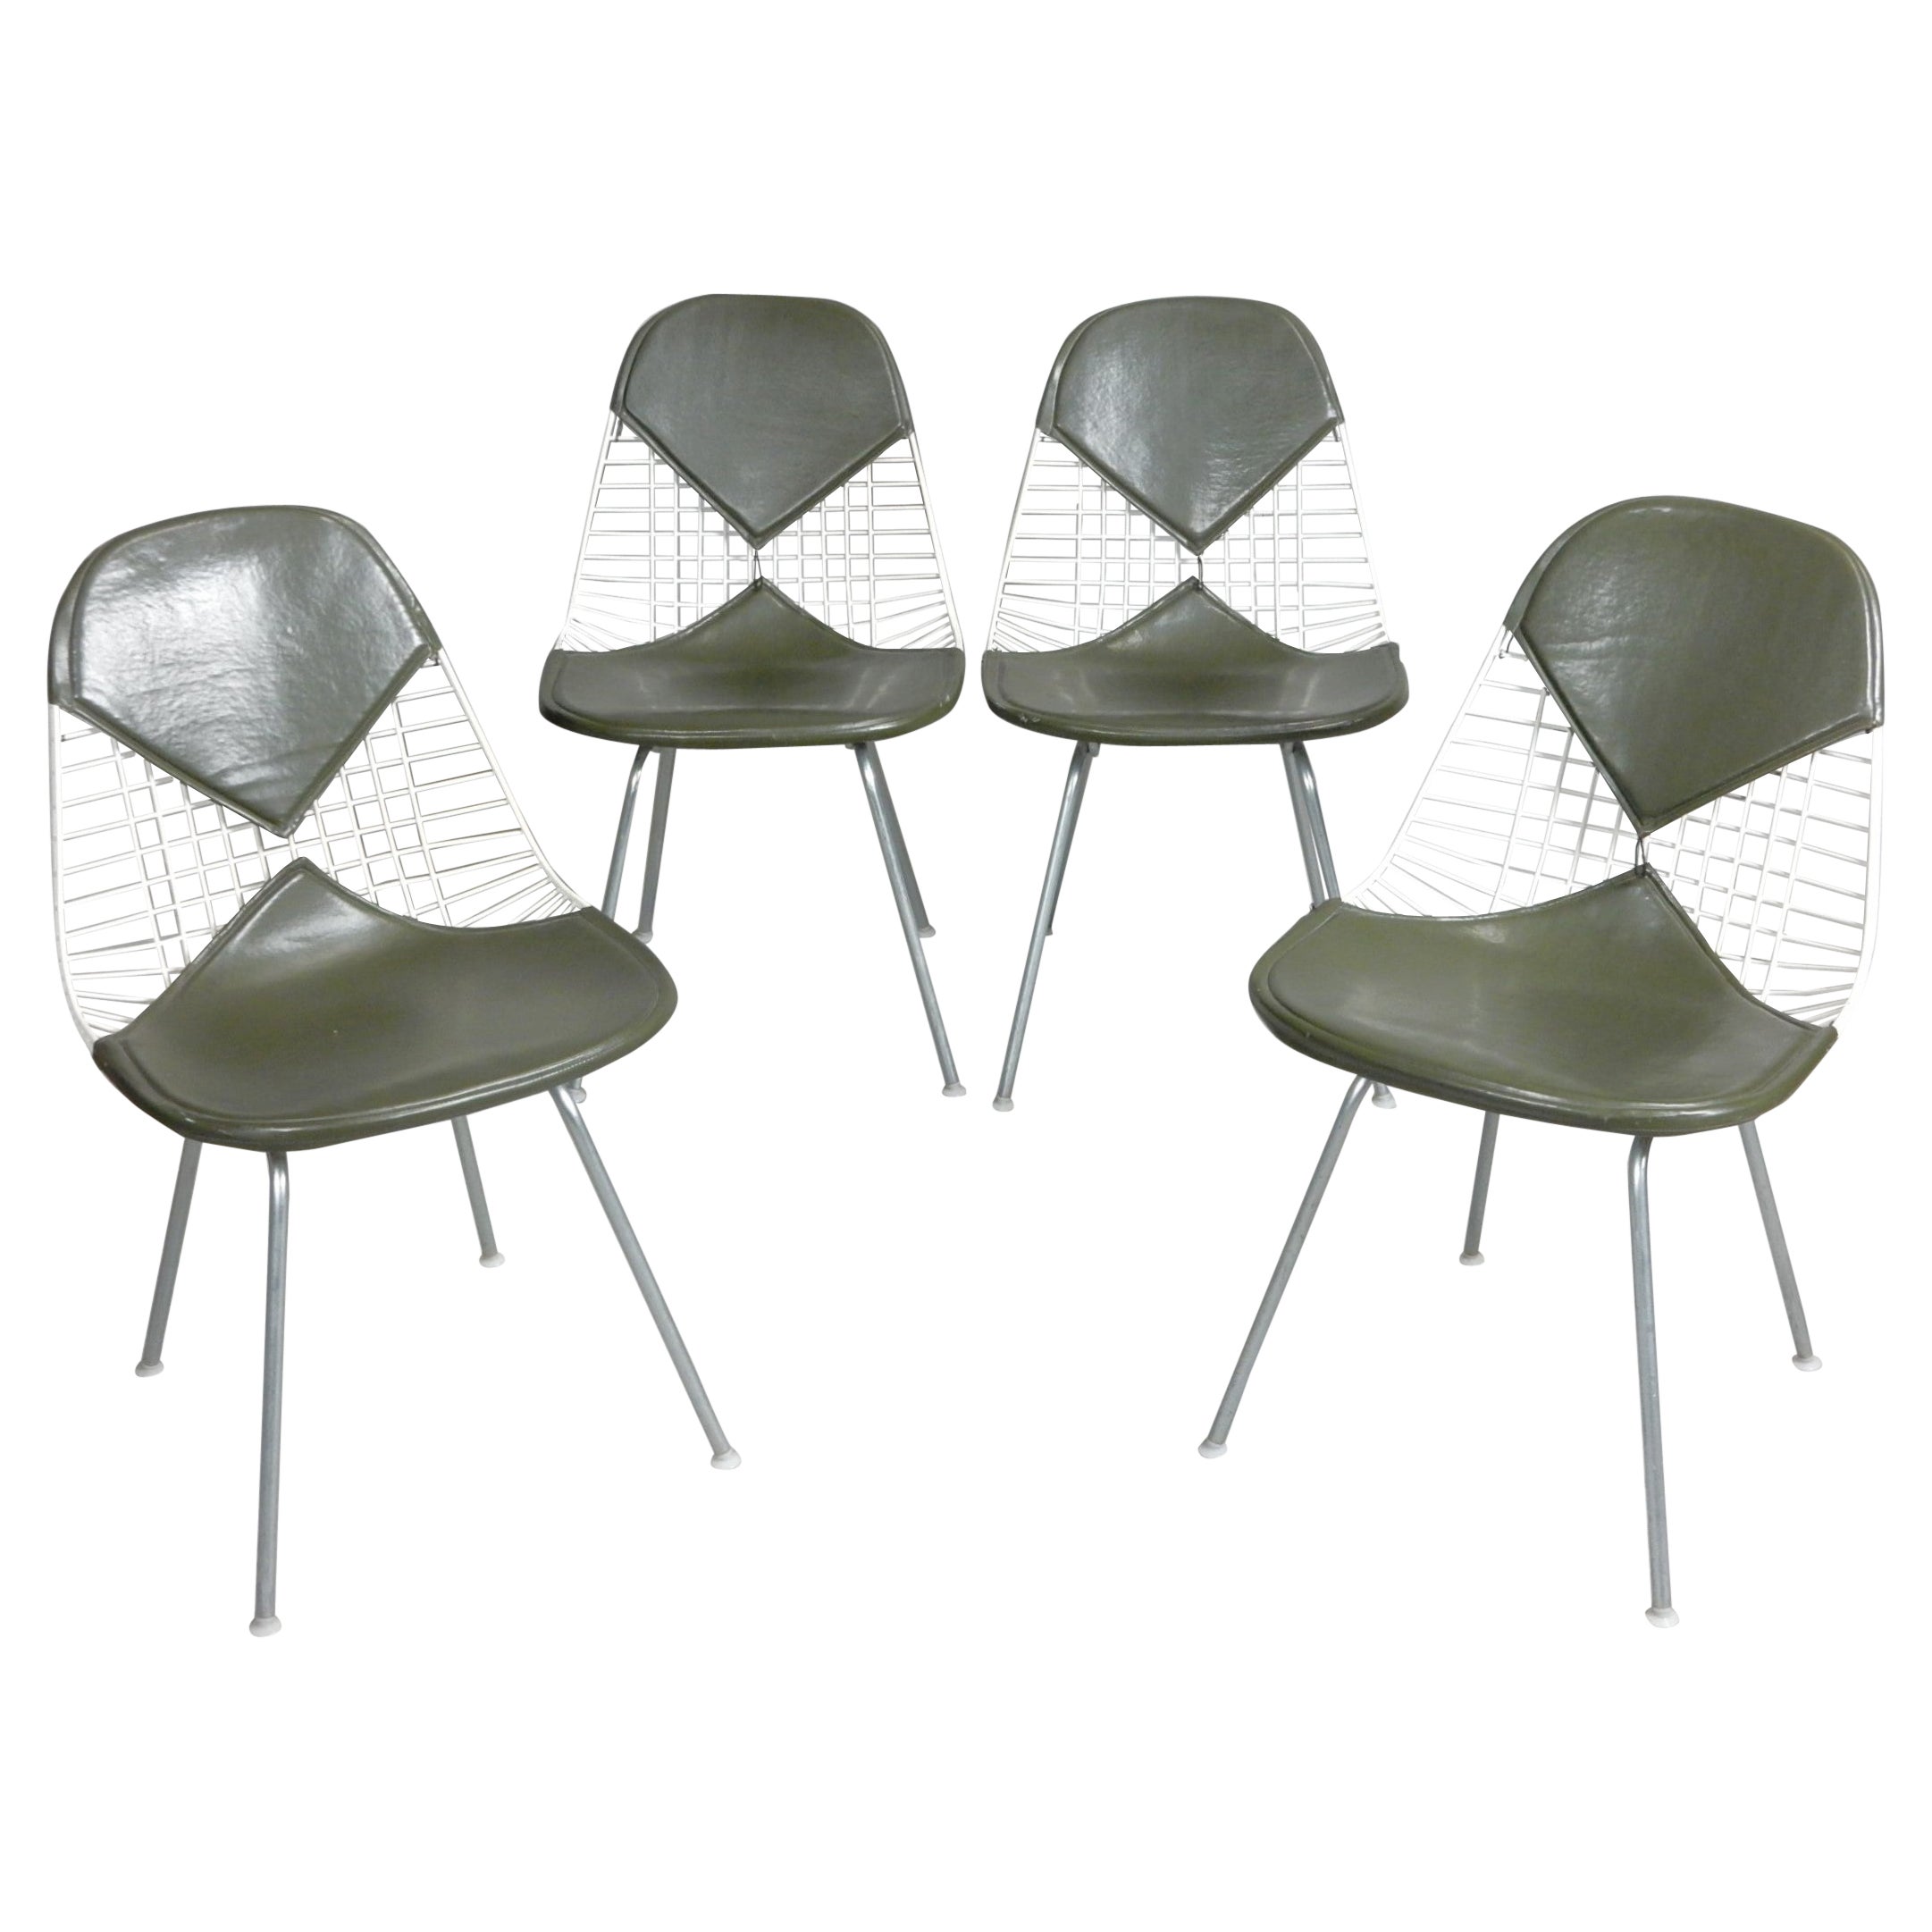 Original 1960's Herman Miller Charles & Ray Eames Bikini Wire Chairs set of 4 For Sale